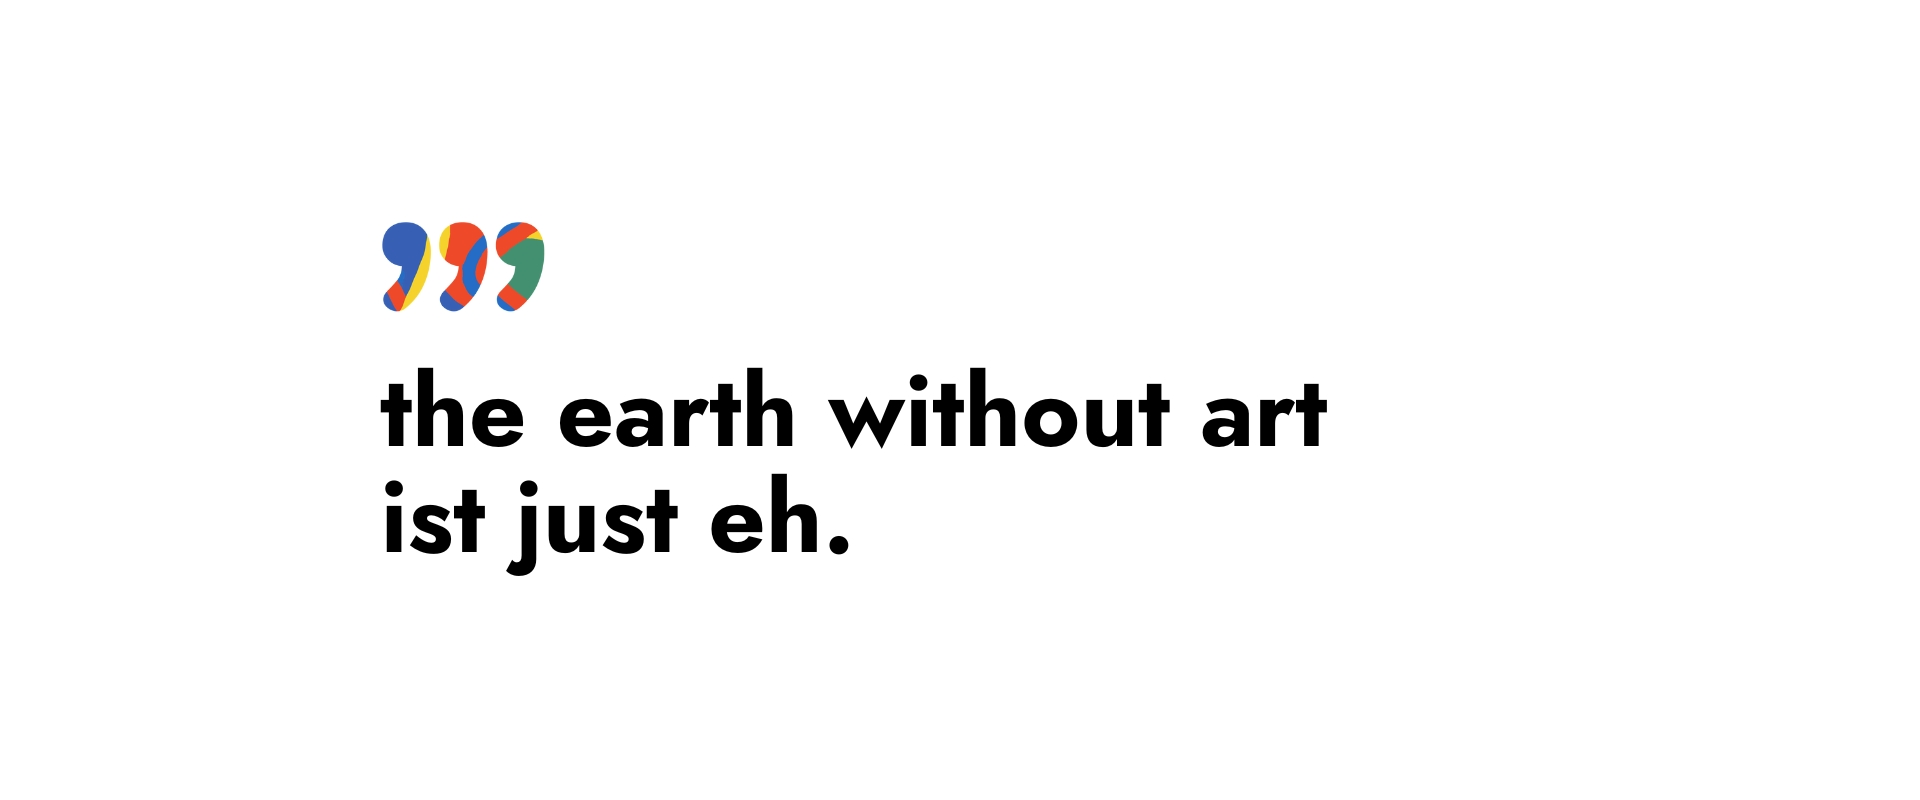 heybico artists the earth without art ist just eh